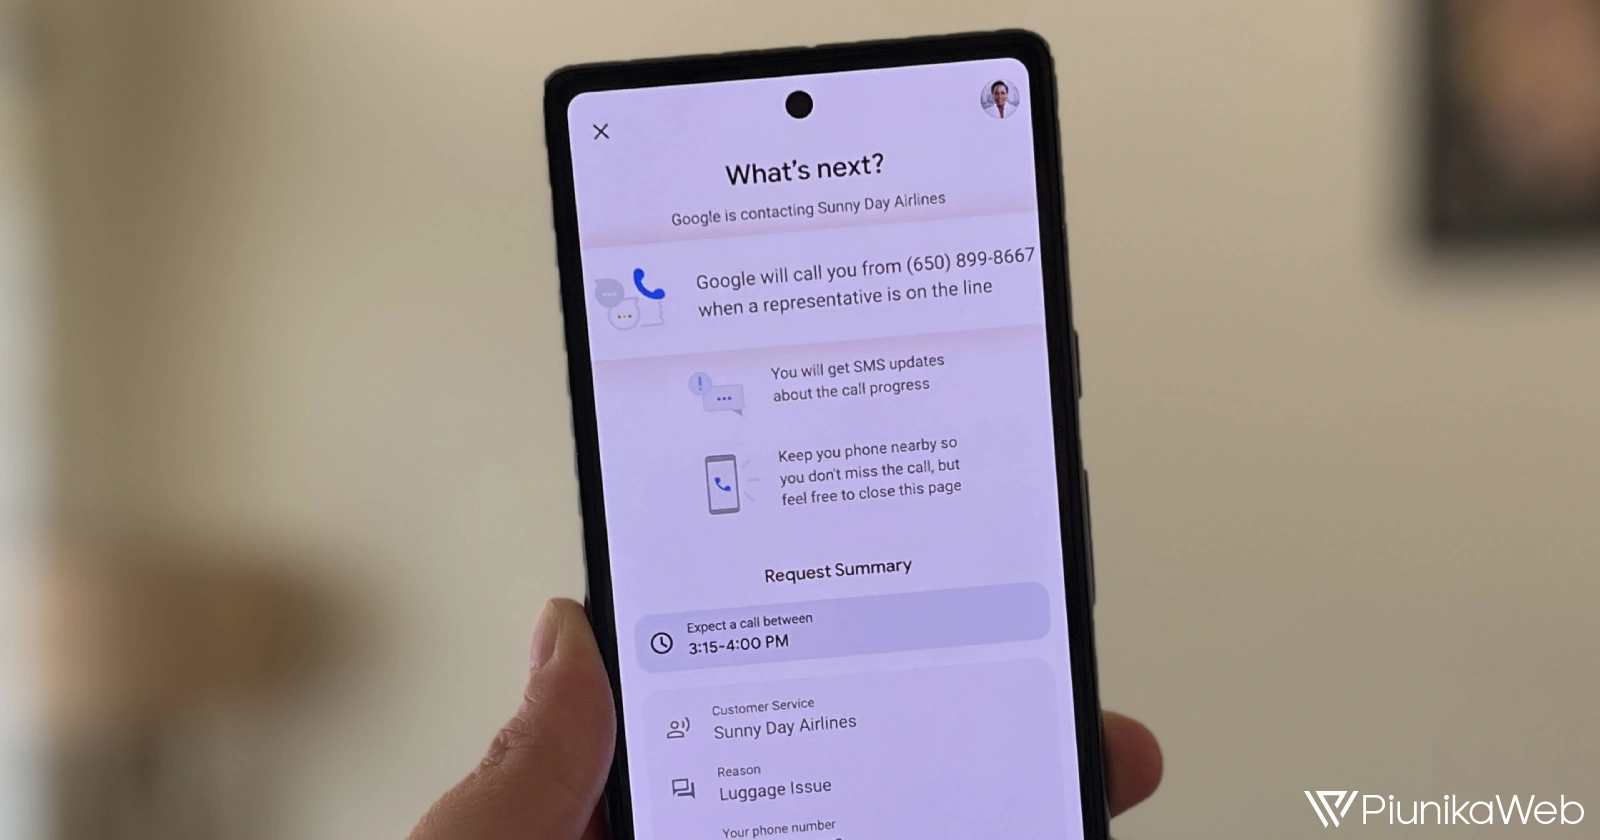 Google Search testing 'Talk to a Live Representative' feature that's similar to 'Hold for Me' on Pixel phones